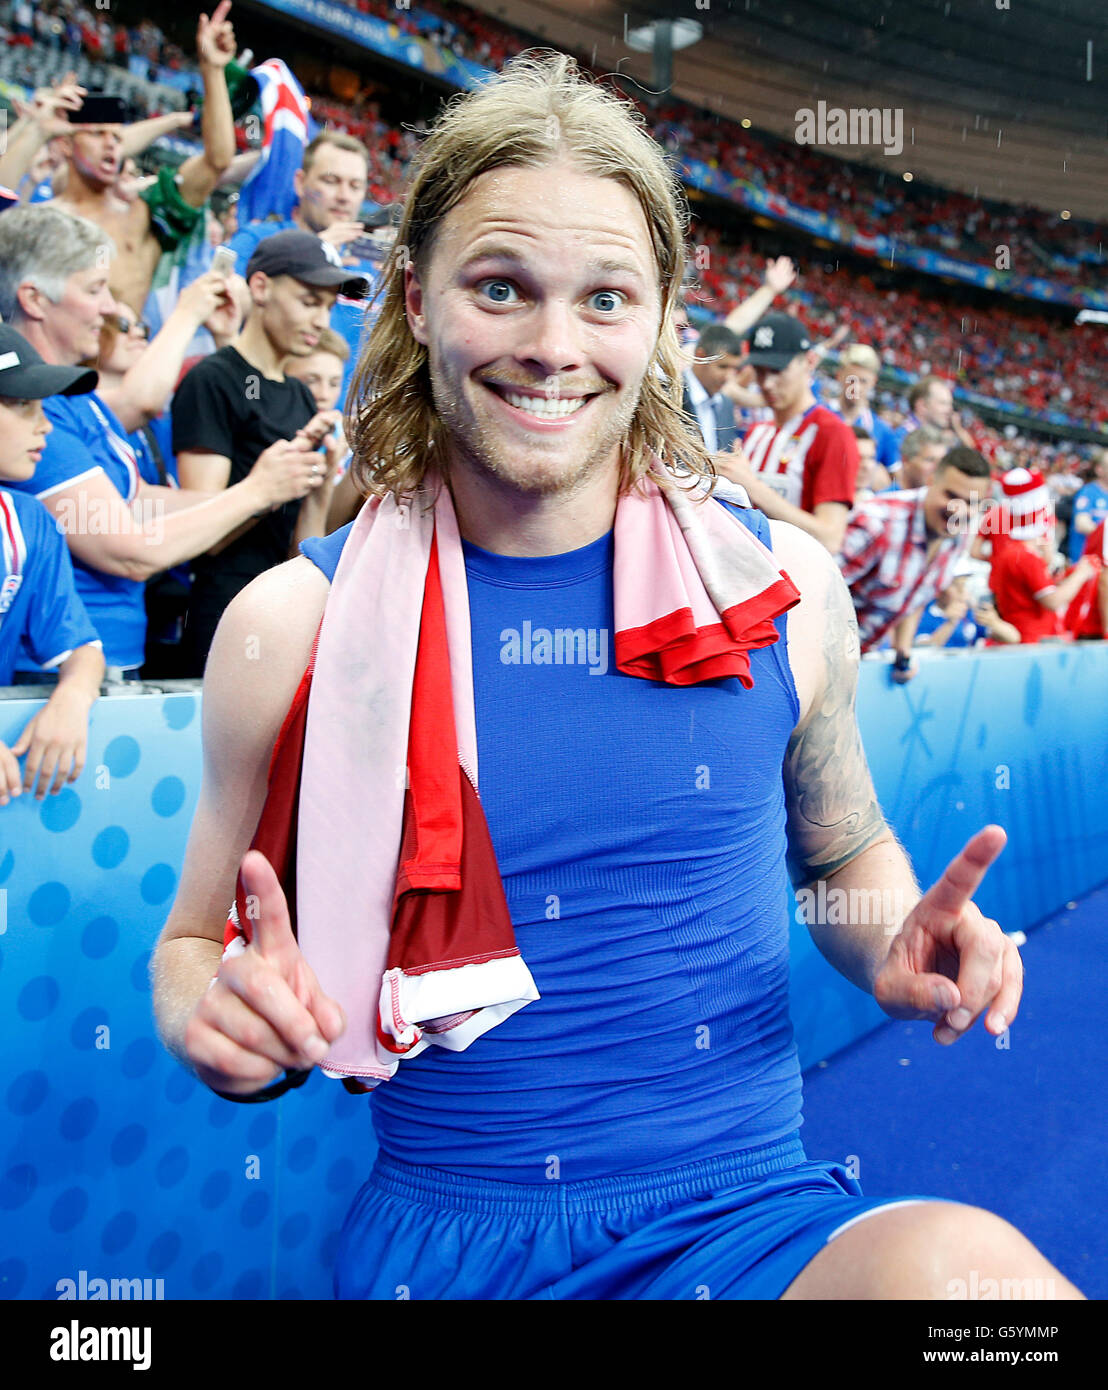 Iceland's Birkir Bjarnason celebrates qualifying for the last 16 round after the Euro 2016, Group F match at the Stade de France, Paris. Stock Photo